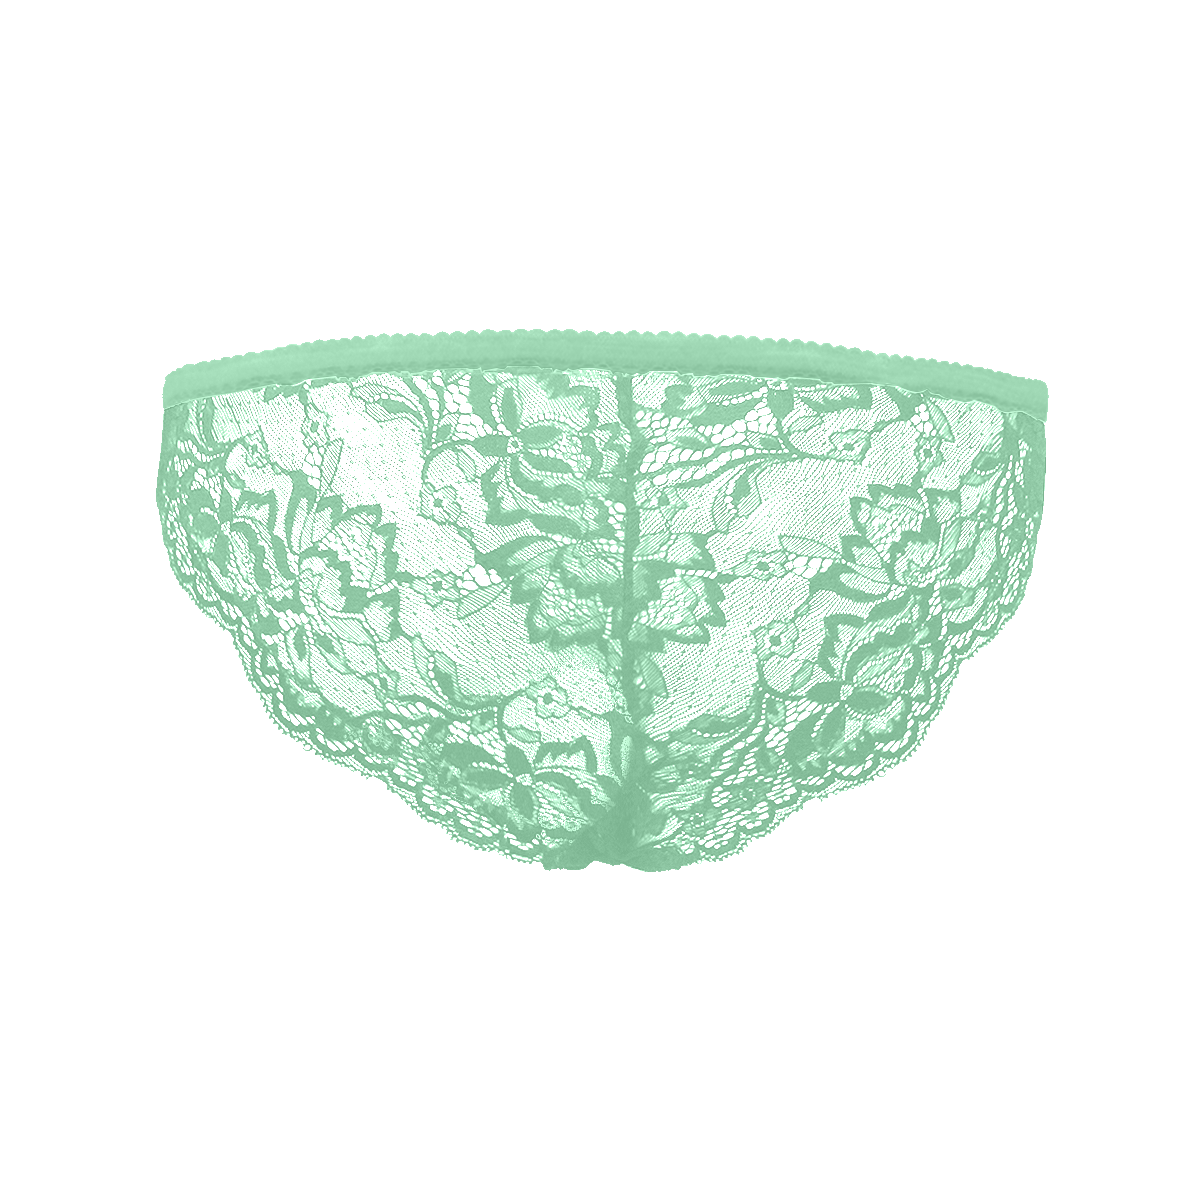 Peach And Green Floral Mint Green Women's Lace Panty (Model L41)